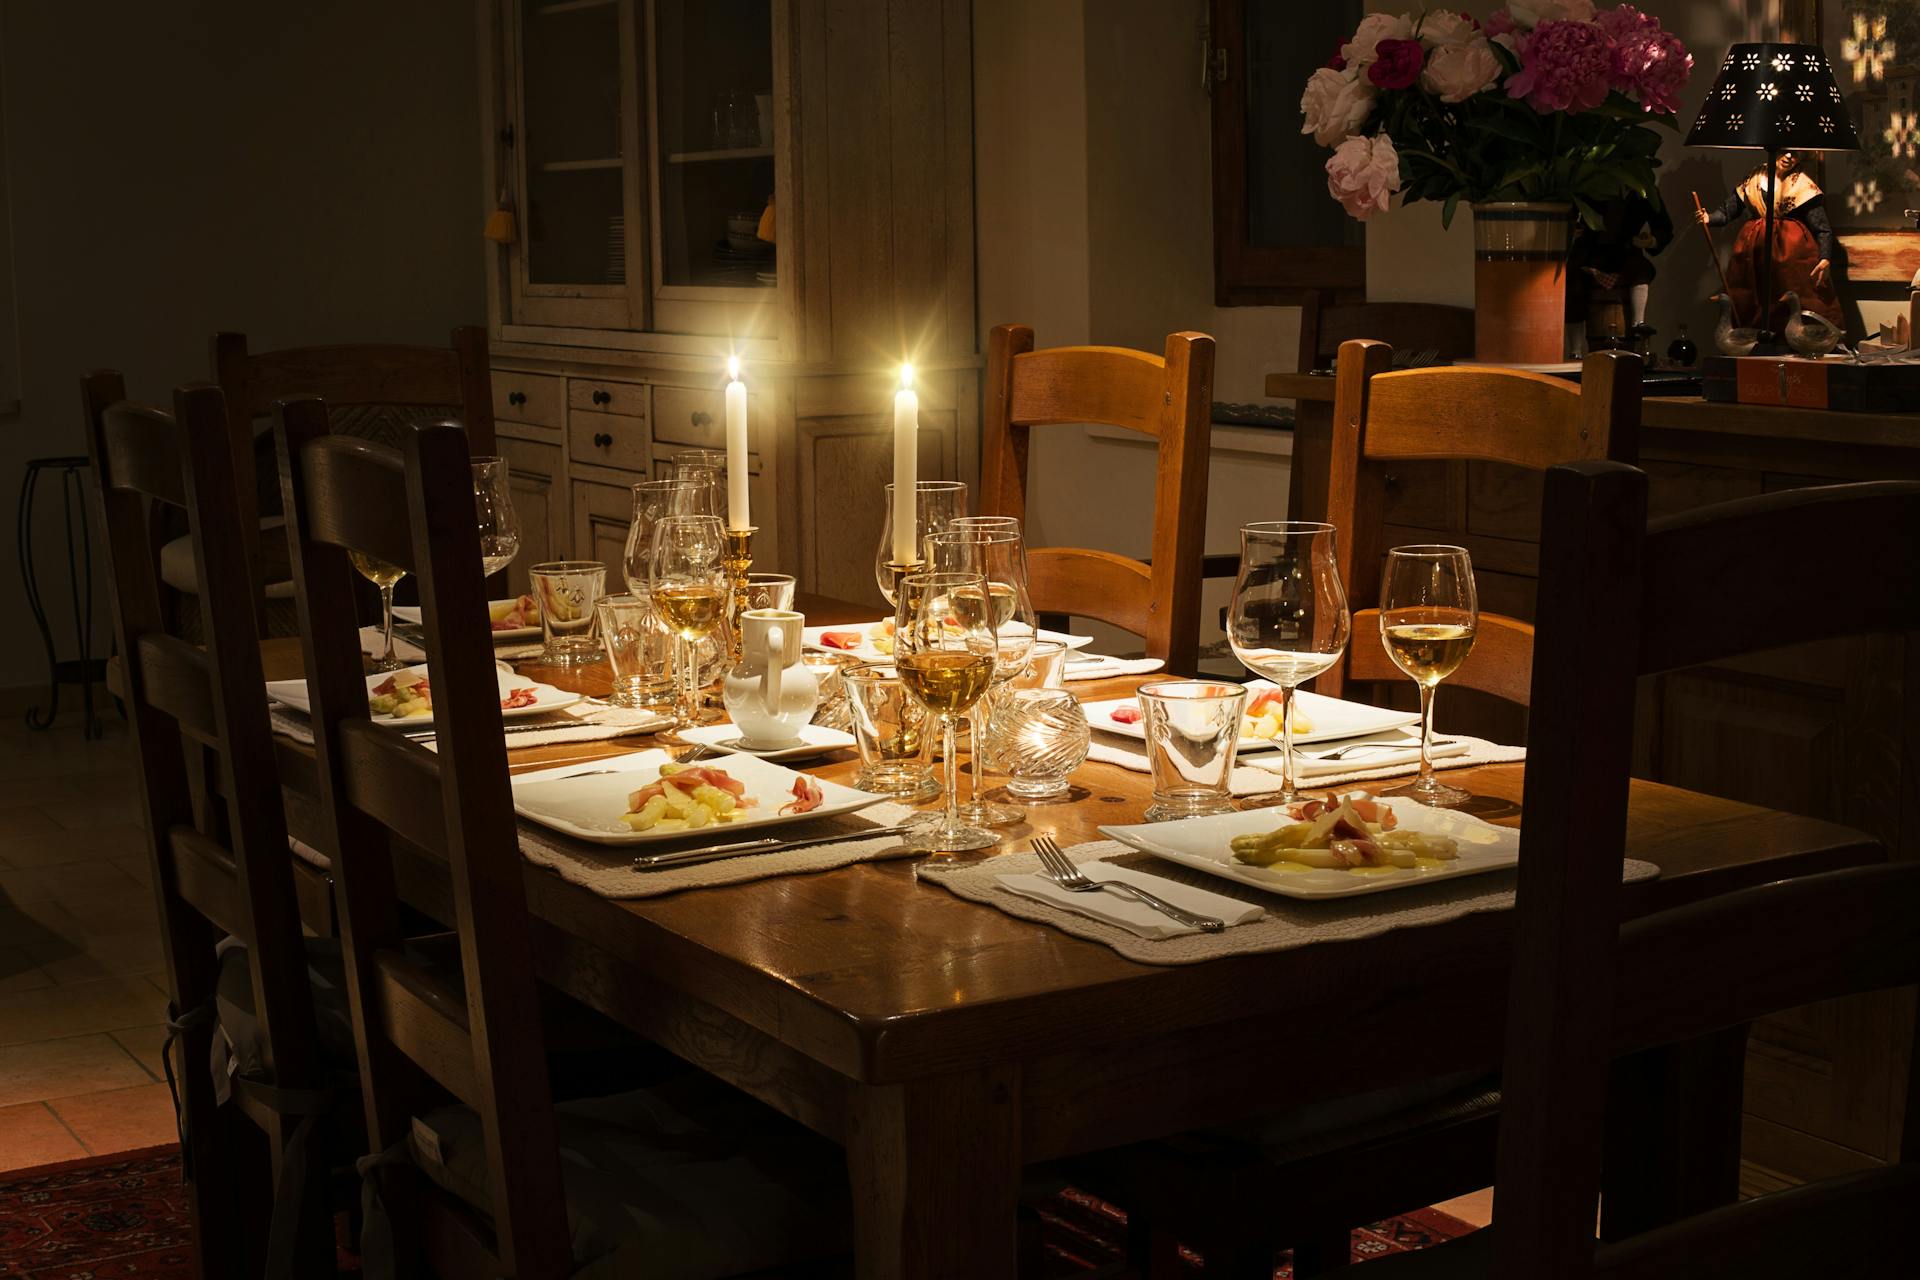 Table set with dinner | Source: Pexels